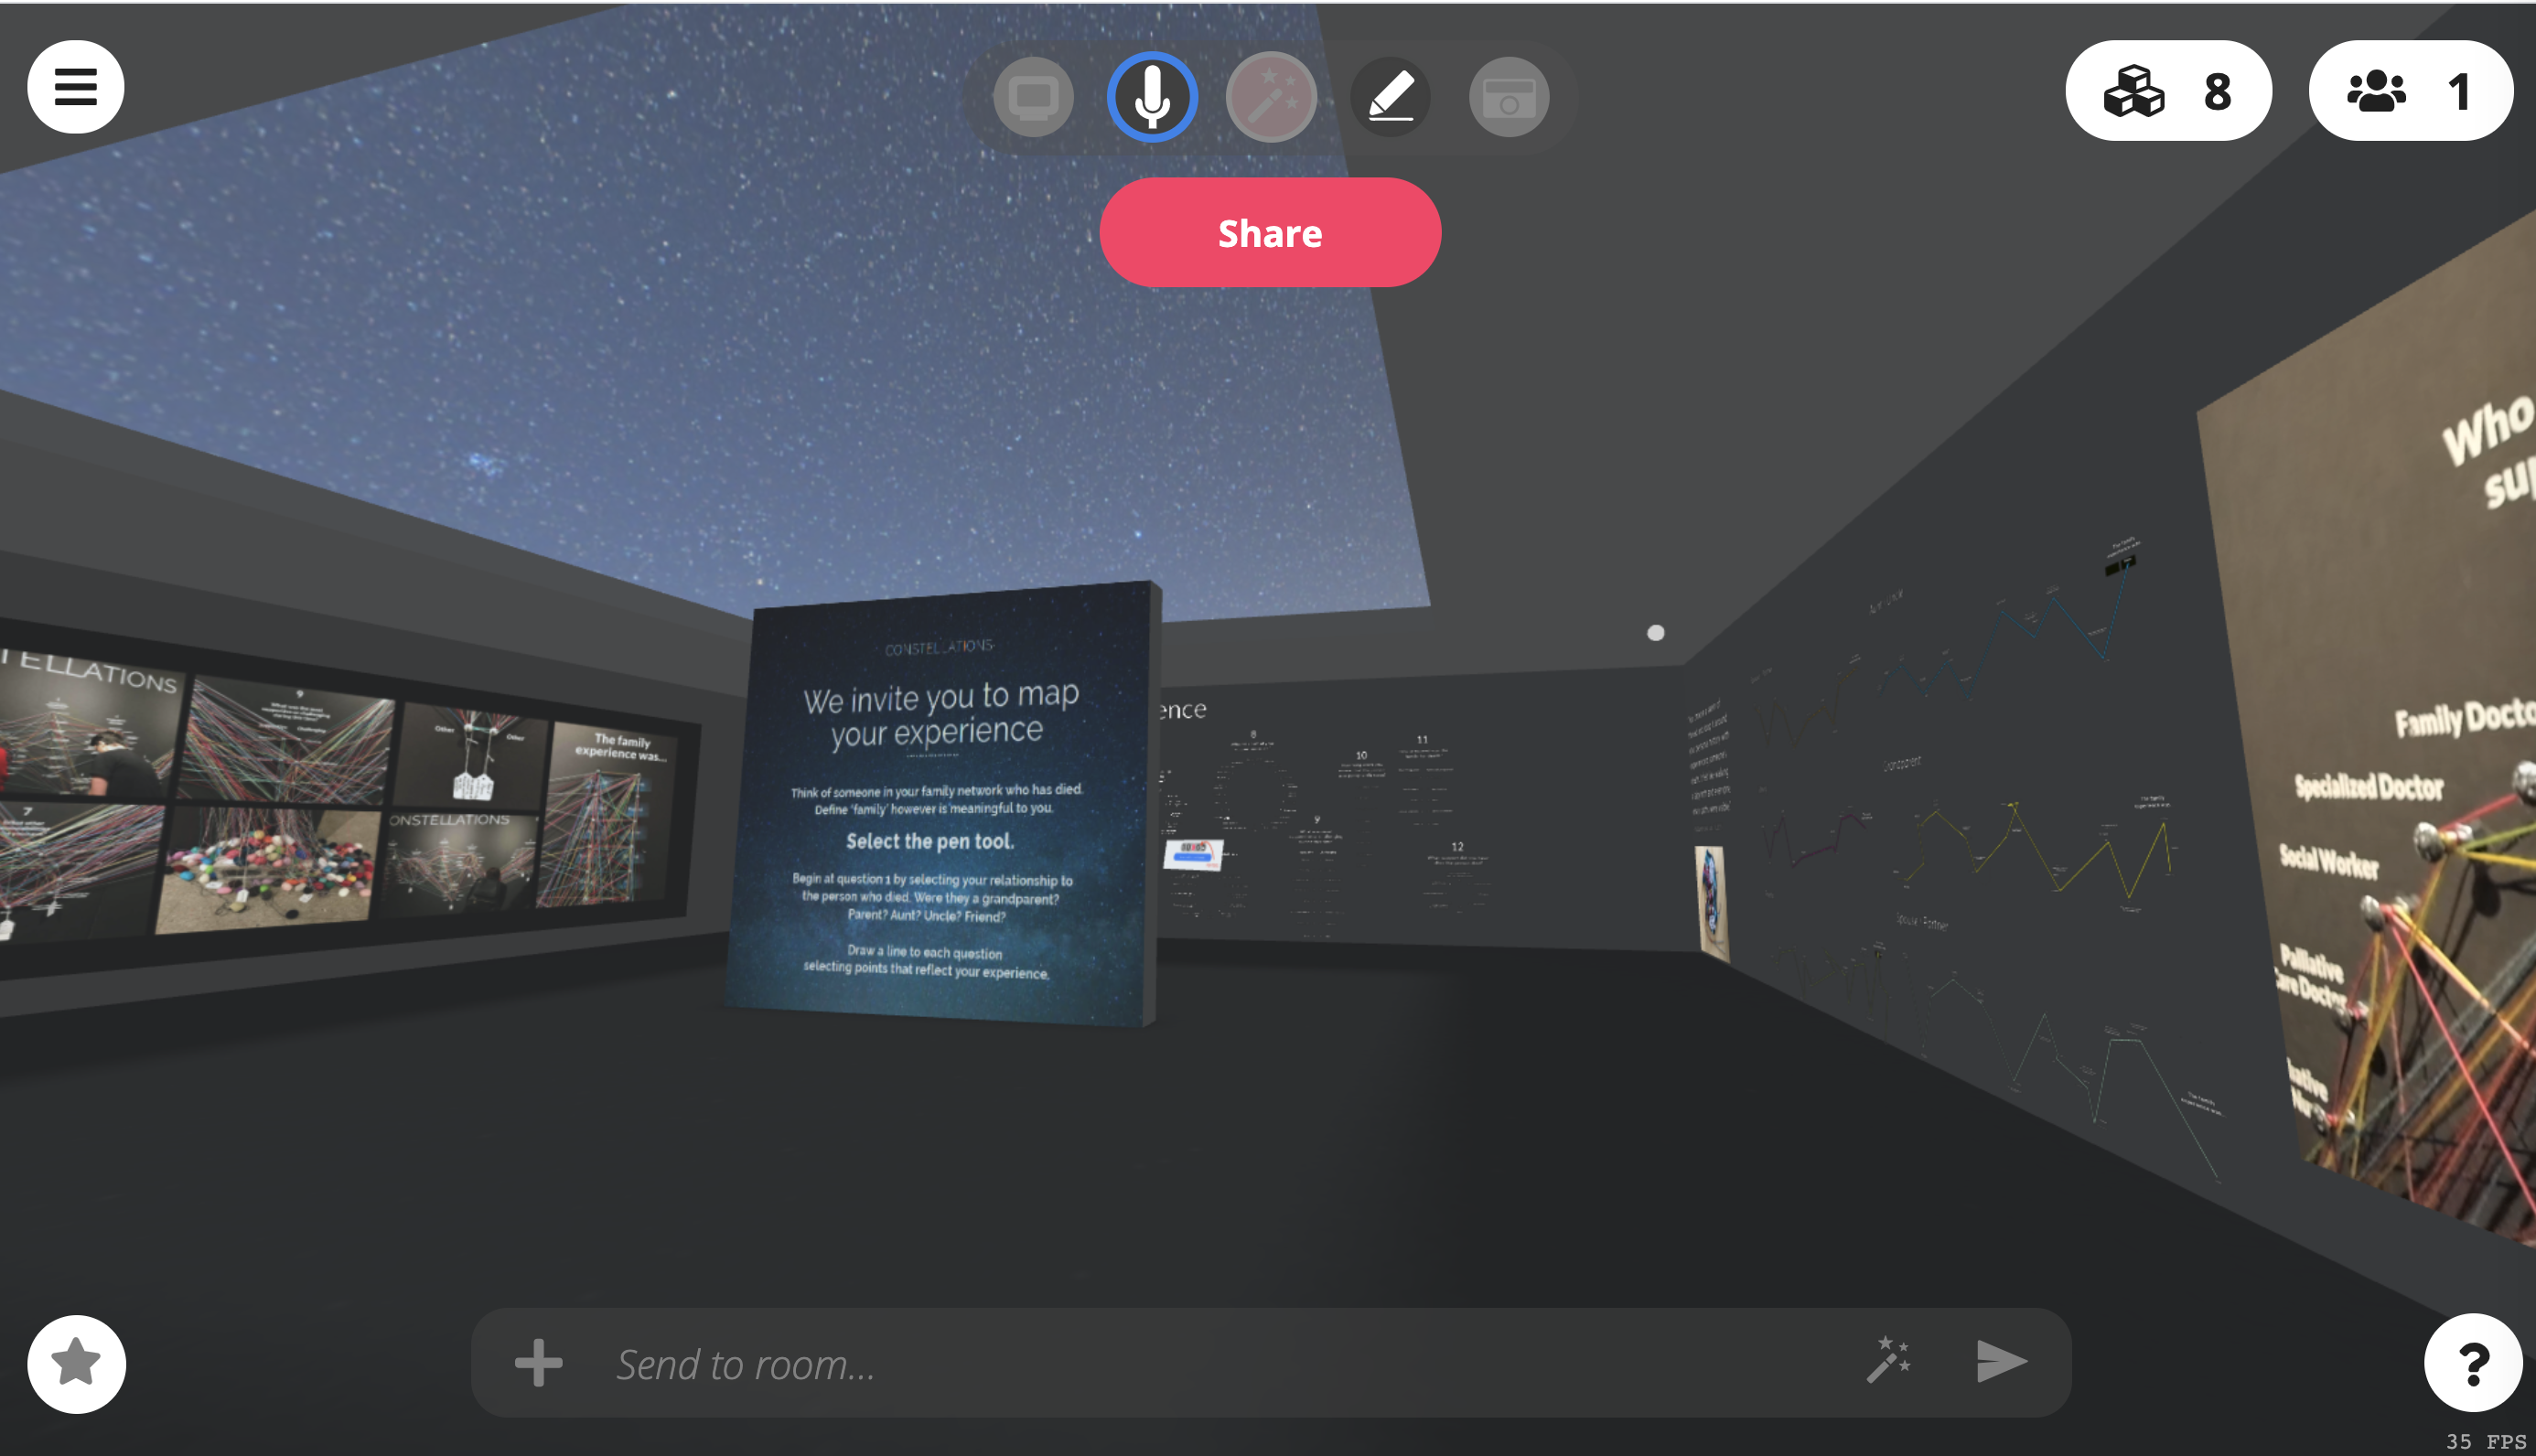 Inside the Constellations' VR installation "We invite you to map your family experience."